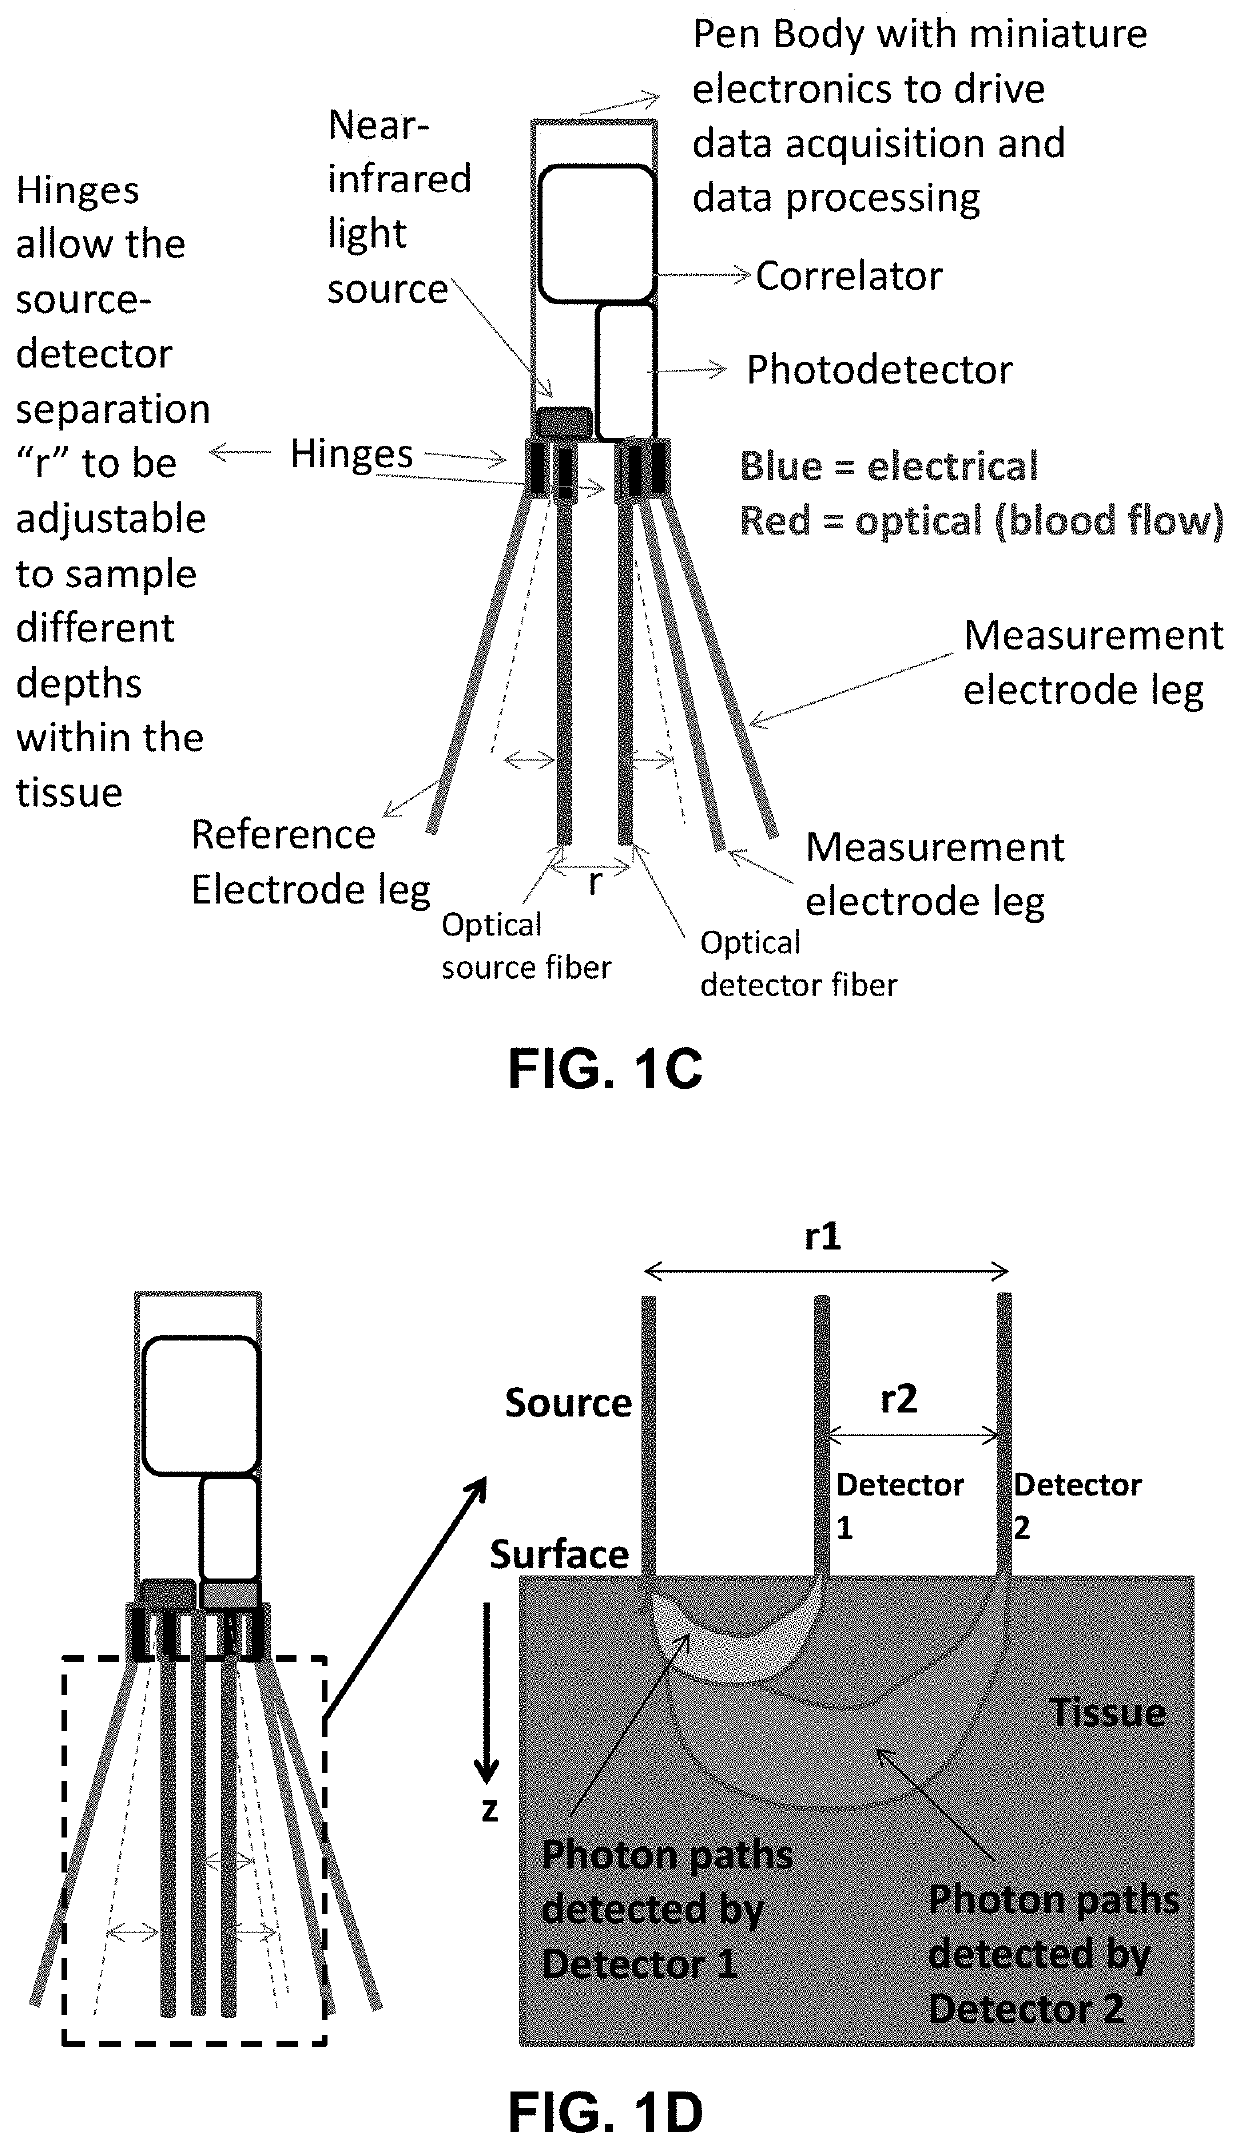 Portable device for quantitative measurement of tissue autoregulation and neurovascular coupling using eeg, metabolism, and blood flow diagnostics